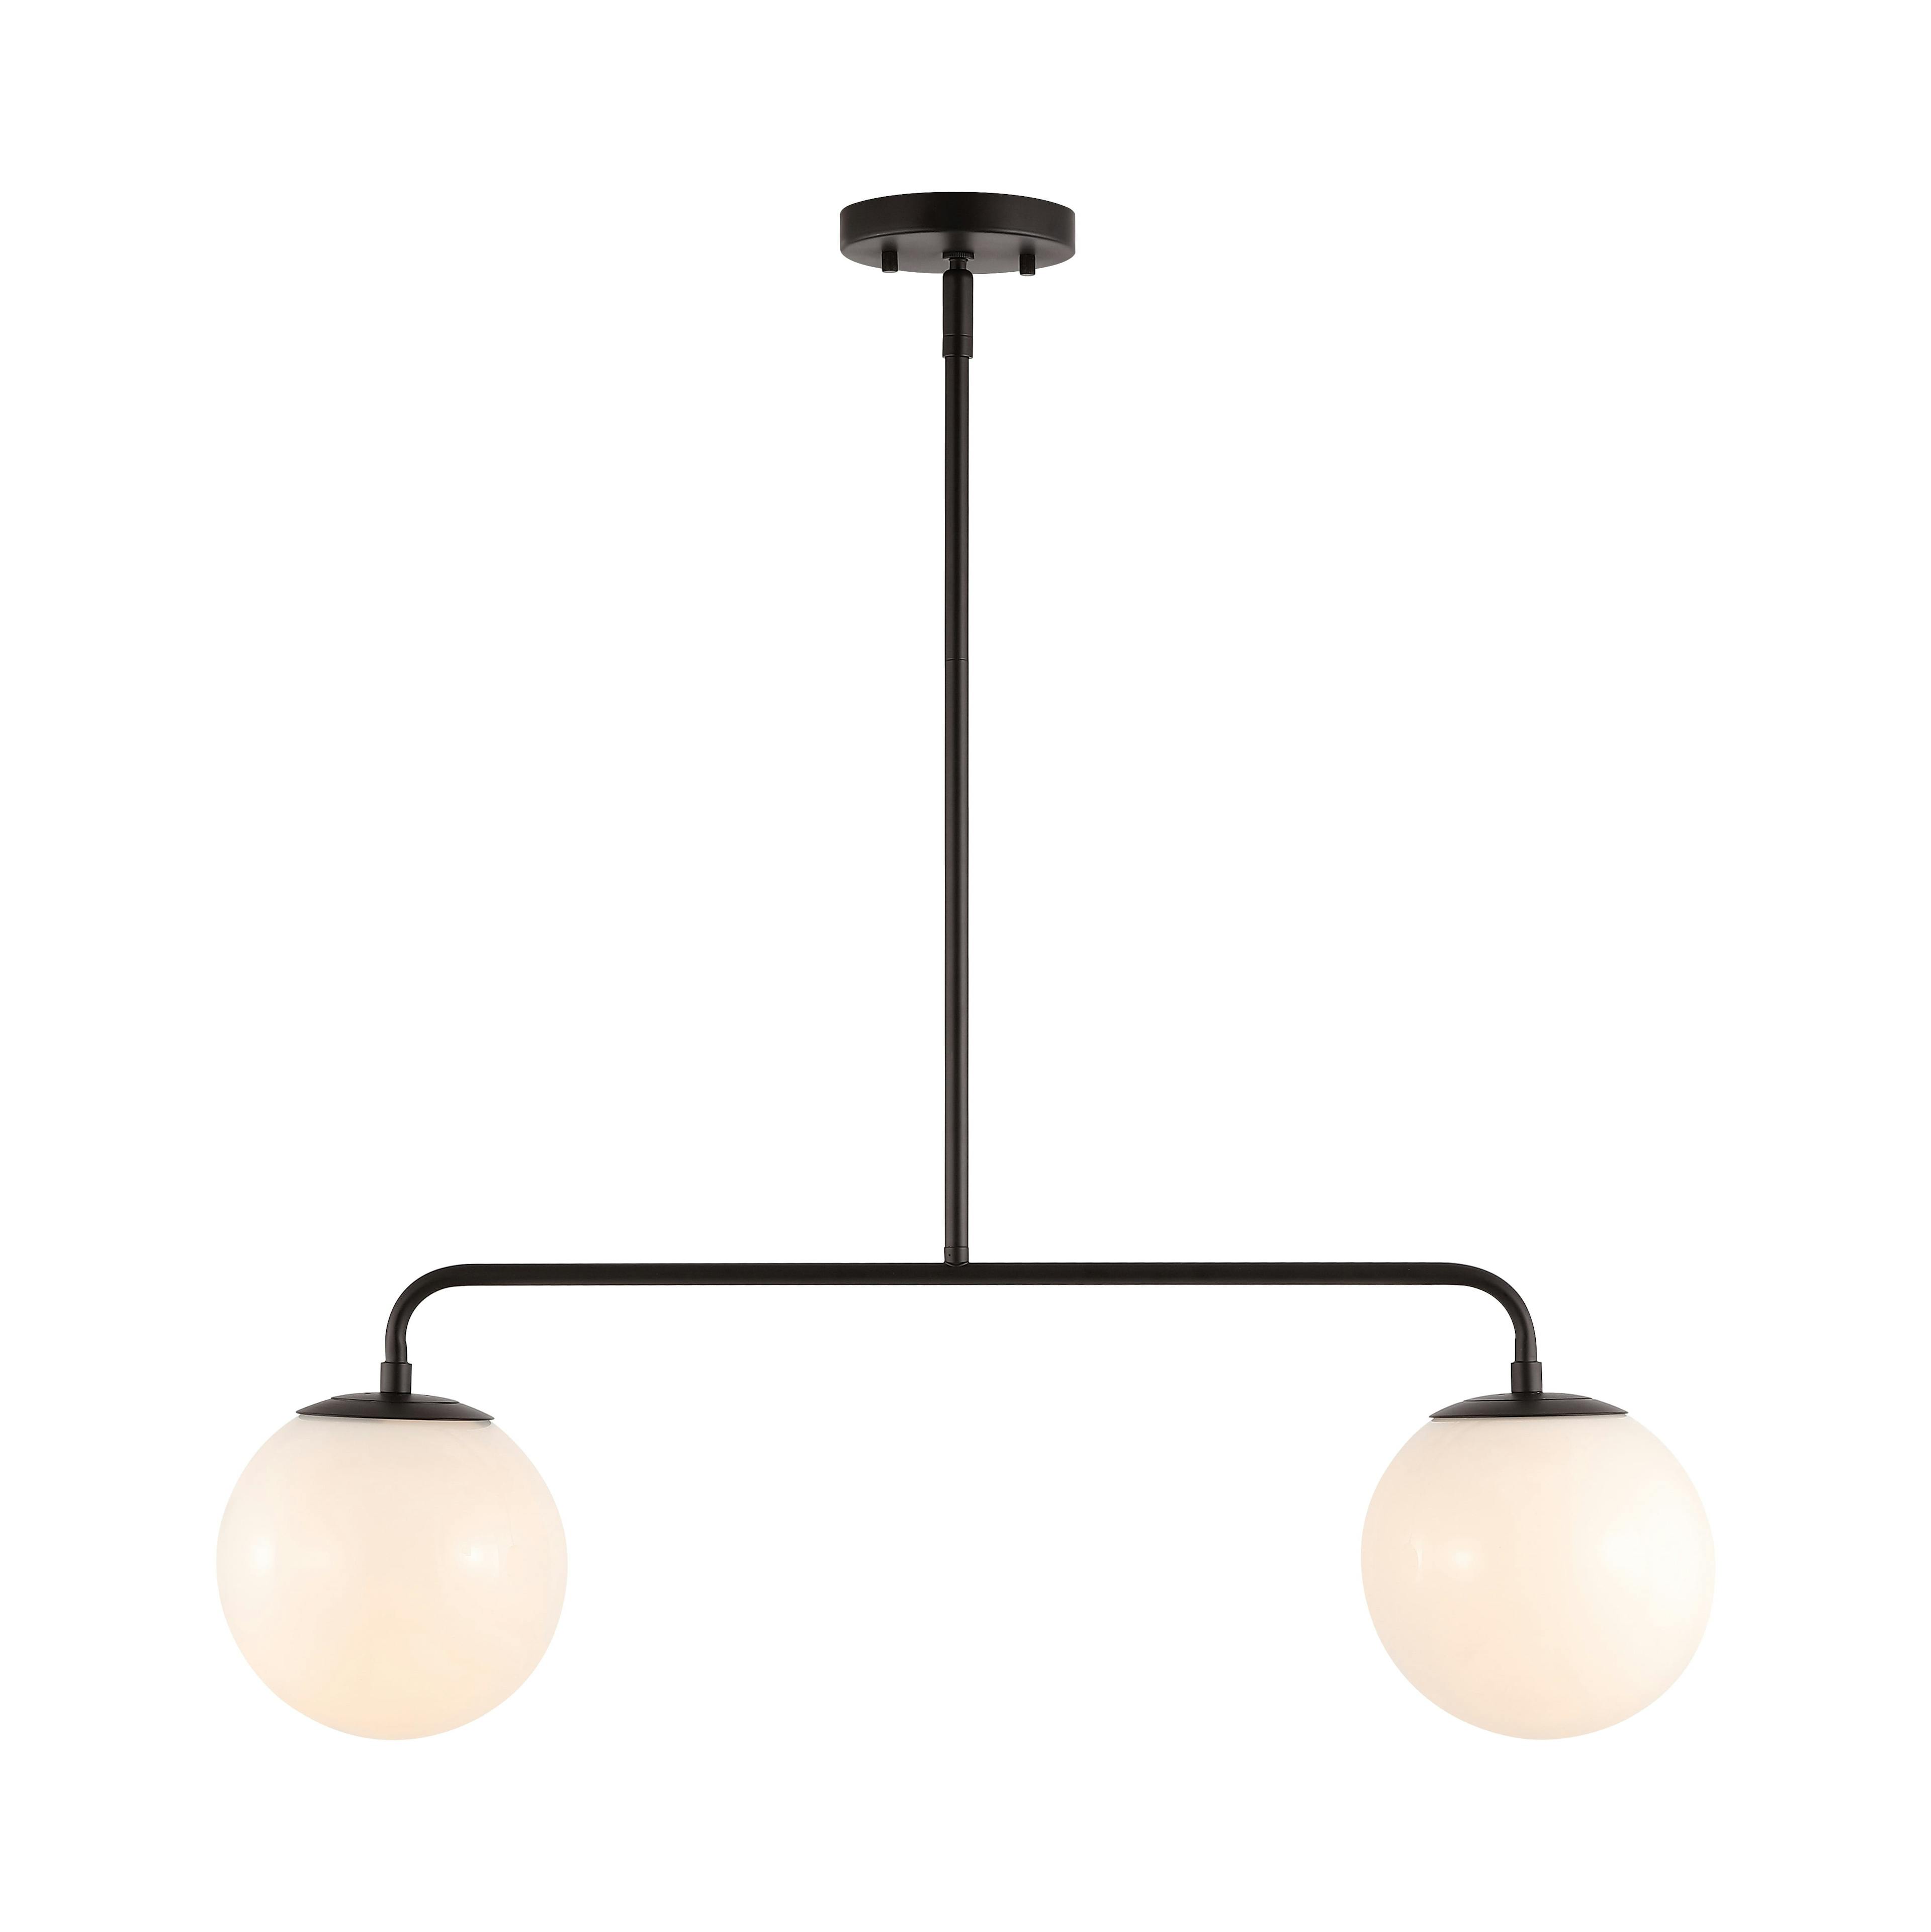 Conyer Matte Black Extendable Pendant with White Globe Shades